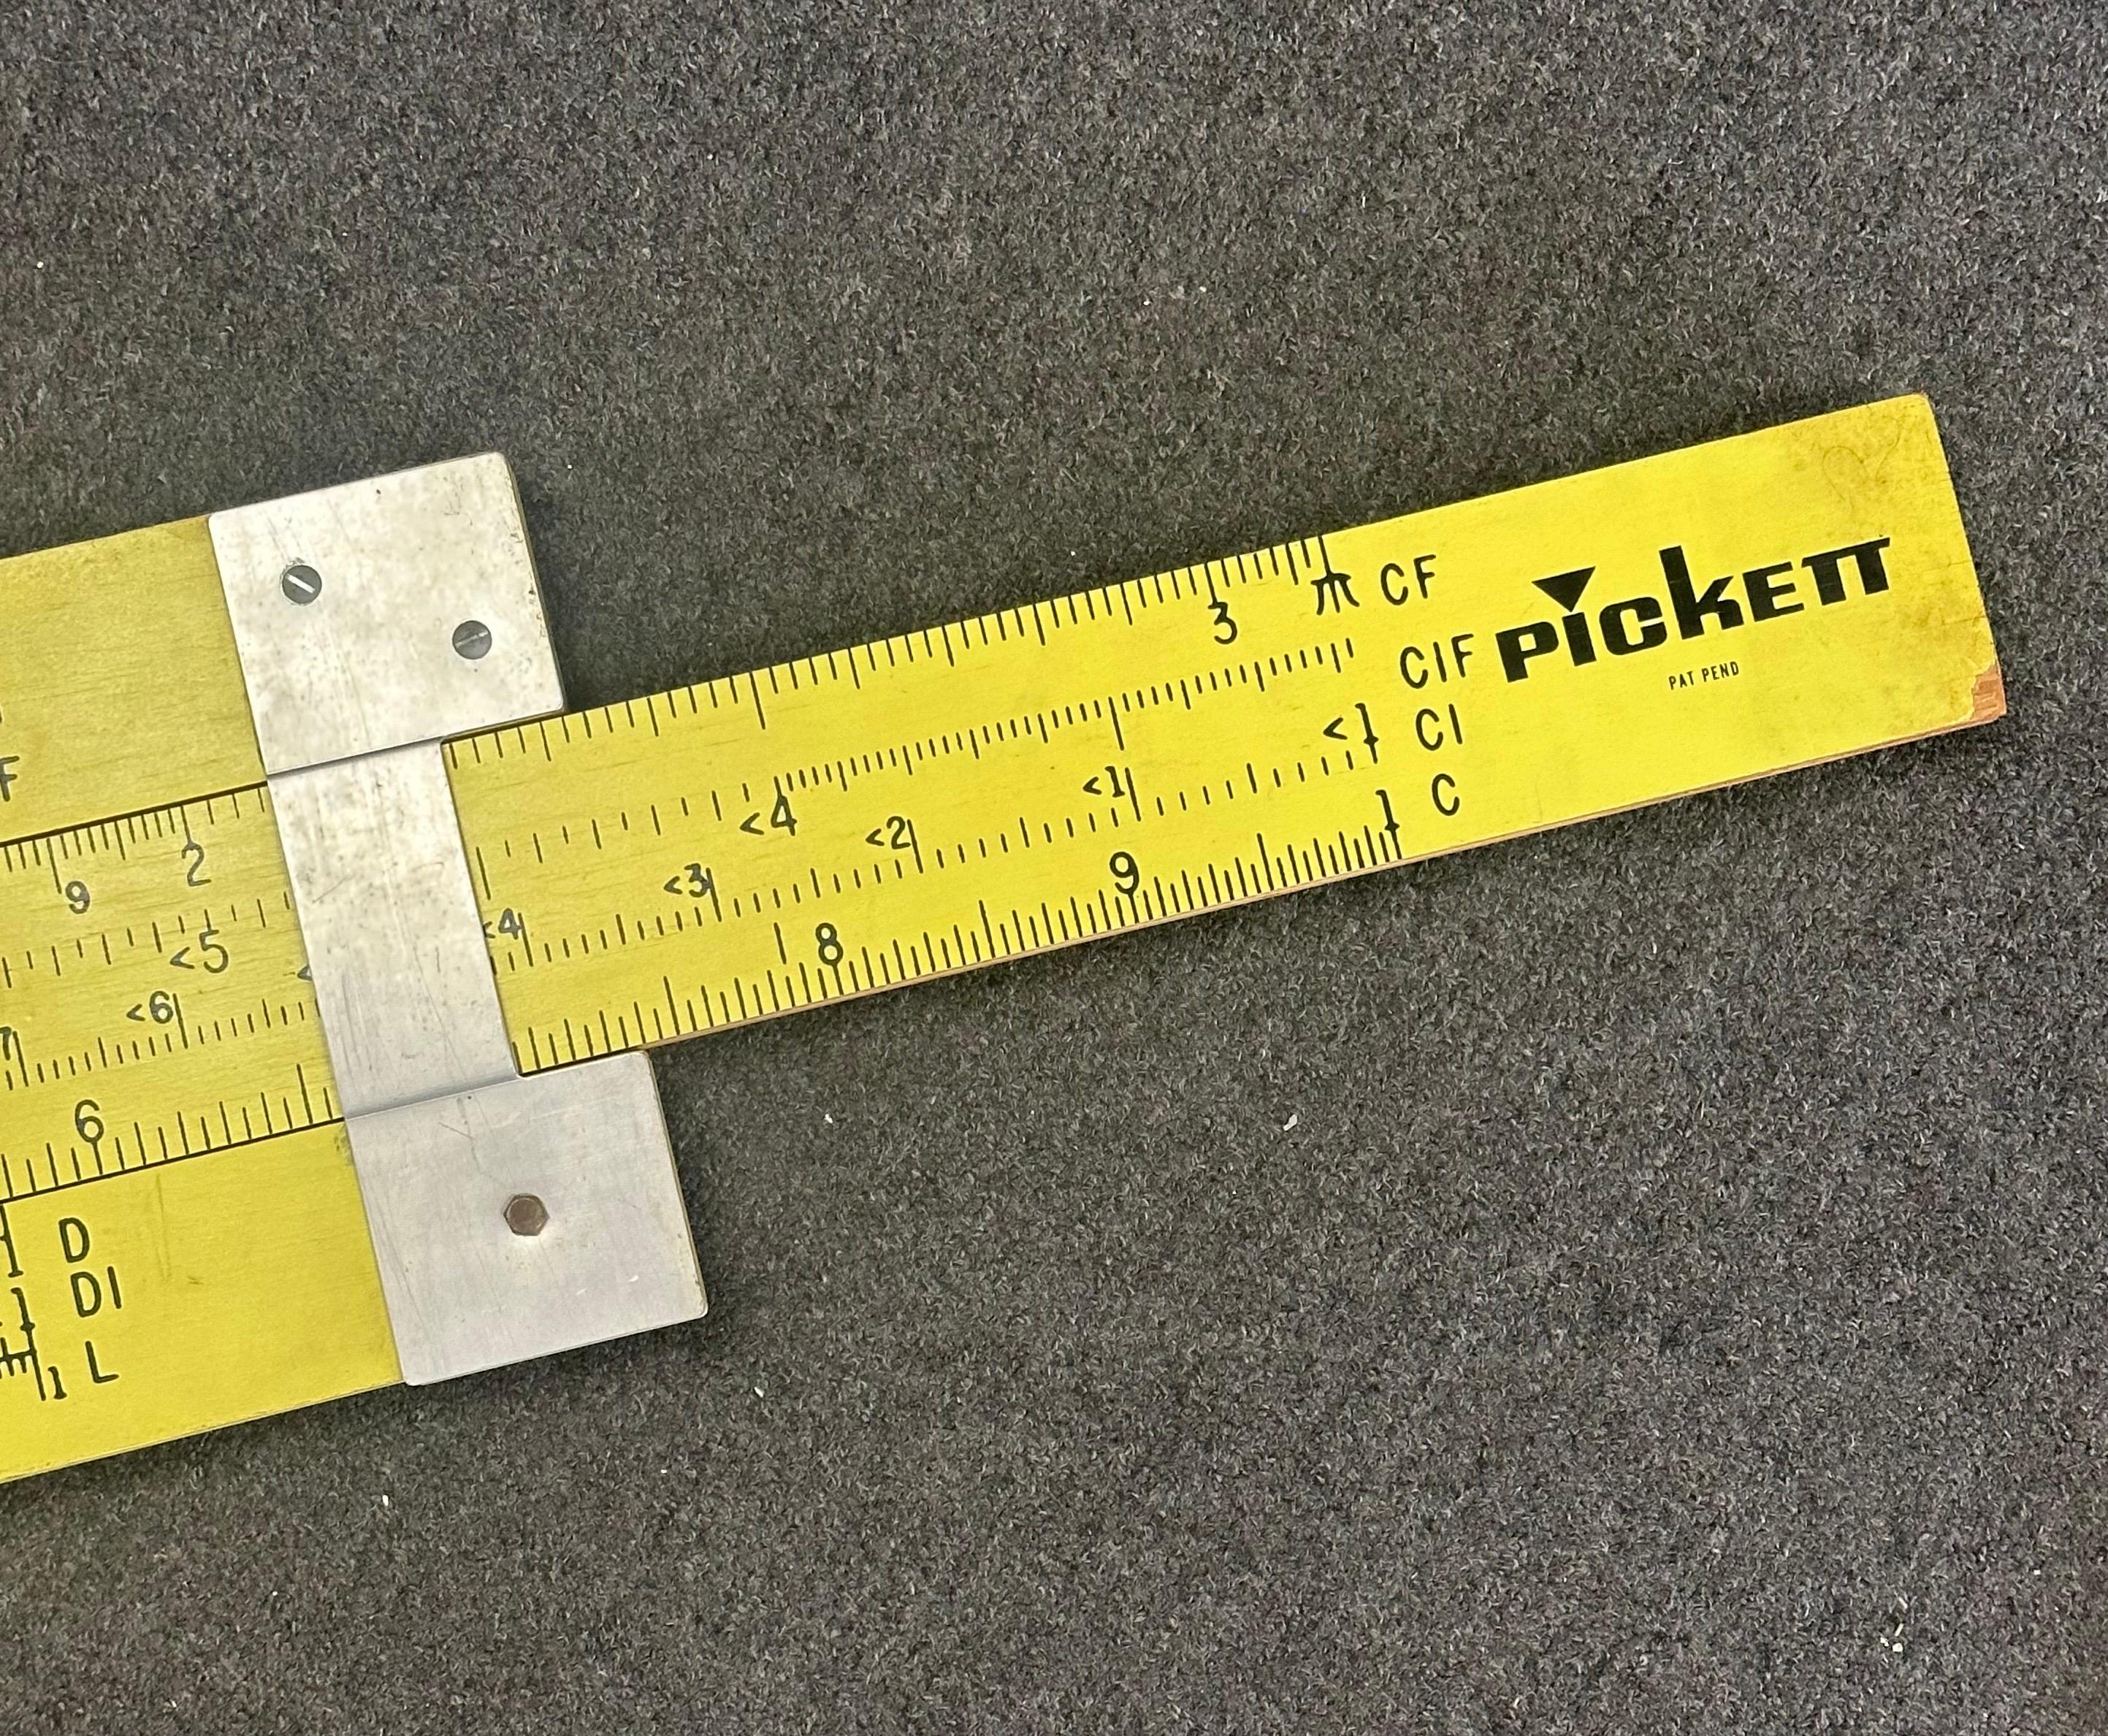 20th Century Unique Vintage Oversized 7' Industrial Slide Rule by Pickett For Sale